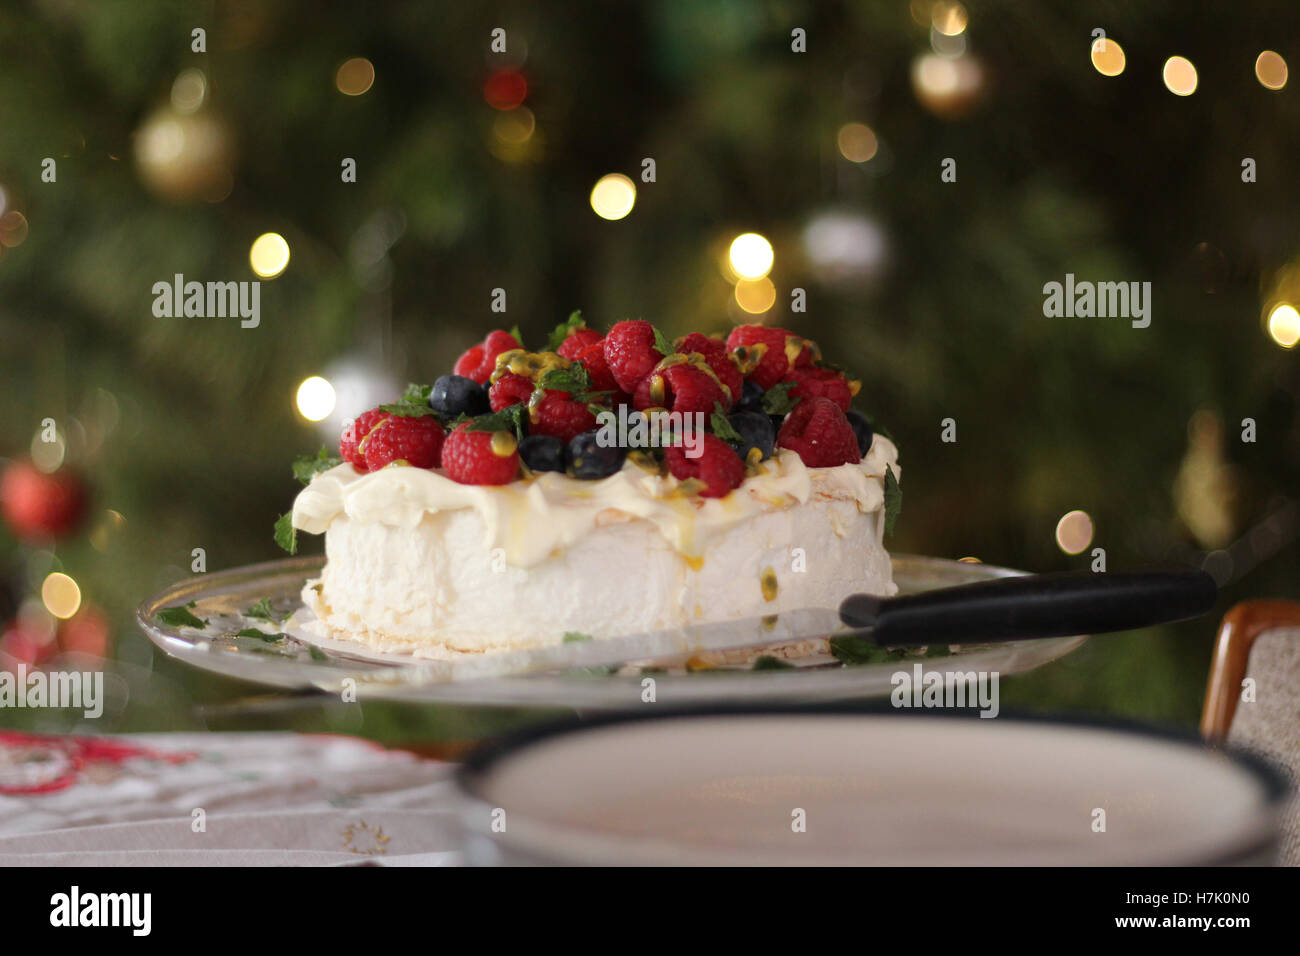 Pavlova with cream & berries, Australian dessert. In the background is the Christmas tree with fairy lights and baubles. Stock Photo